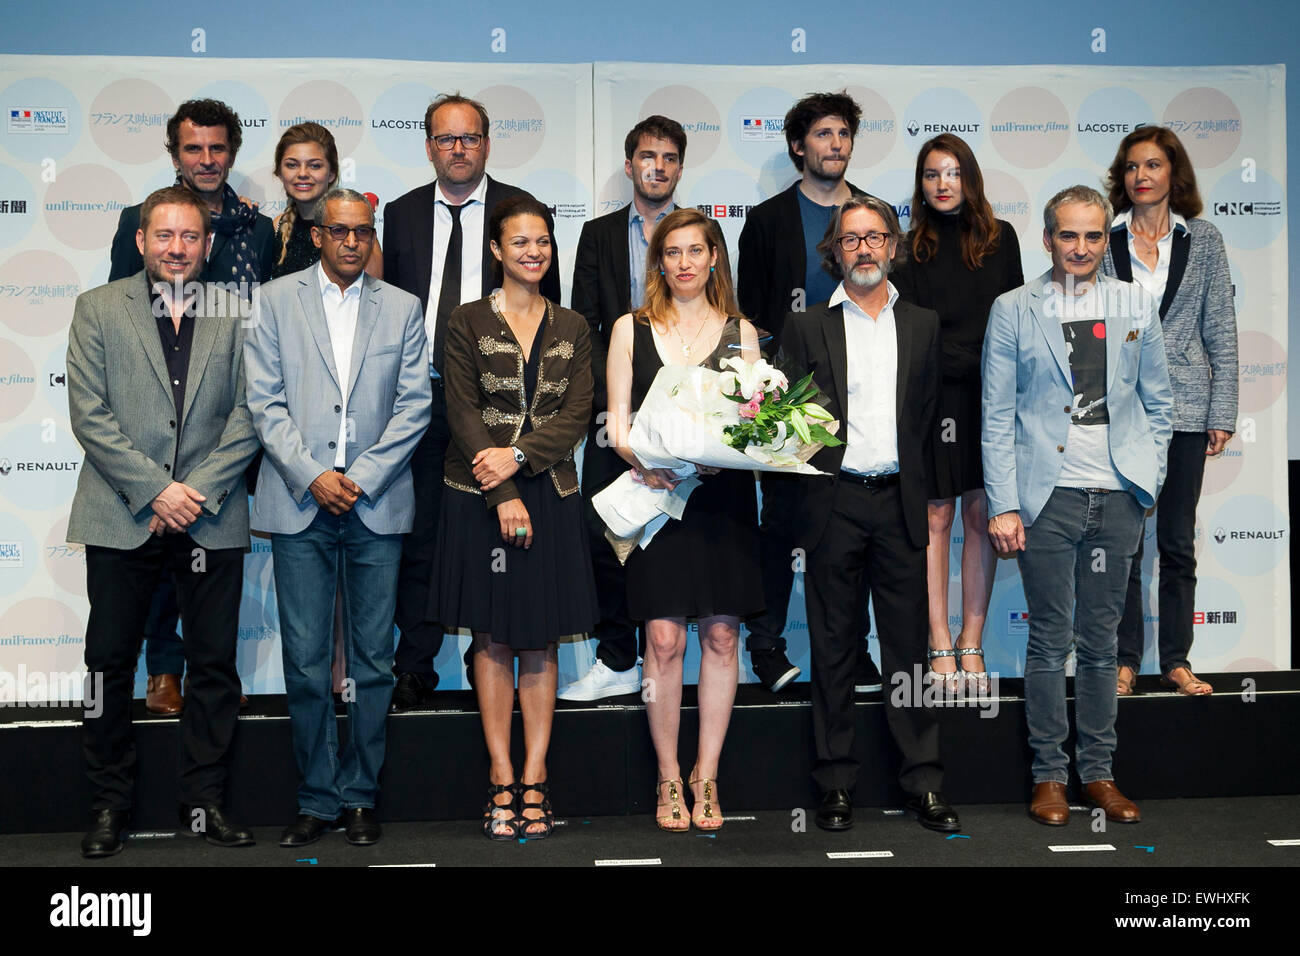 Tokyo, Japan. 26th June, 2015. (L to R) Erick Lartigau, Louane Emera, Xavier Beauvois, Sven Hansen-Love, Felix de Givry, Anais Demoustier, Anne Fontaine, Juliano Ribeiro, Abderrahmane Sissako, Emmanuelle Devos, Martin Provost pose for the cameras during the opening ceremony of the Festival du Film Francais au Japon 2015 on June 26, 2015, Tokyo, Japan. This year 12 movies will be screened during the festival from June 26th to 29th. Credit:  Rodrigo Reyes Marin/AFLO/Alamy Live News Stock Photo